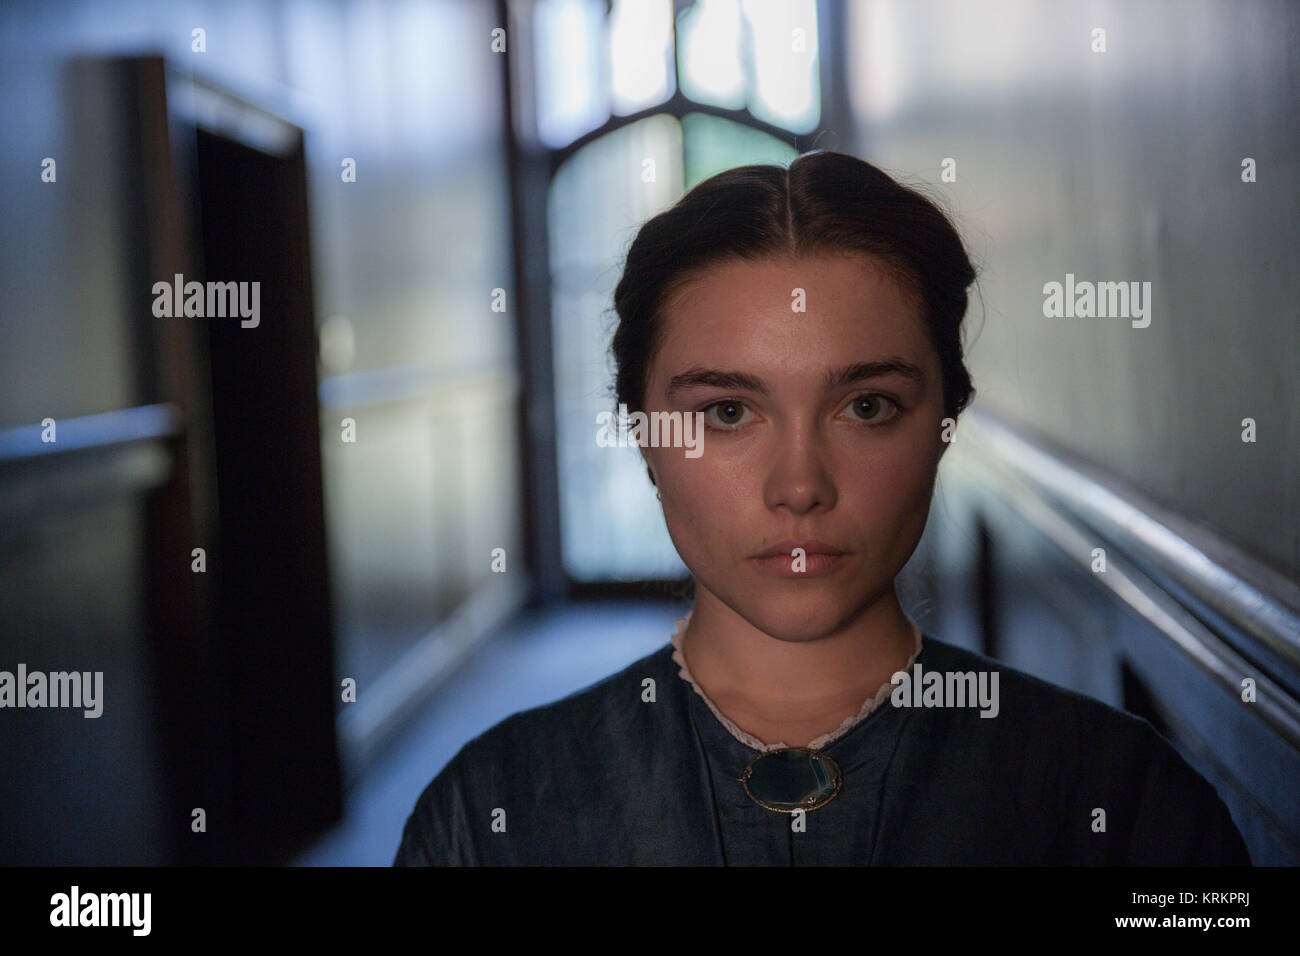 RELEASE DATE: July 14, 2017 TITLE: Lady Macbeth STUDIO: BBC Films DIRECTOR: William Oldroyd PLOT: In 19th-century rural England, a young bride who has been sold into marriage discovers an unstoppable desire within herself as she enters into an affair with a worker on her estate. STARRING: FLORENCE PUGH as Katherine. (Credit Image: © BBC Films/Entertainment Pictures) Stock Photo